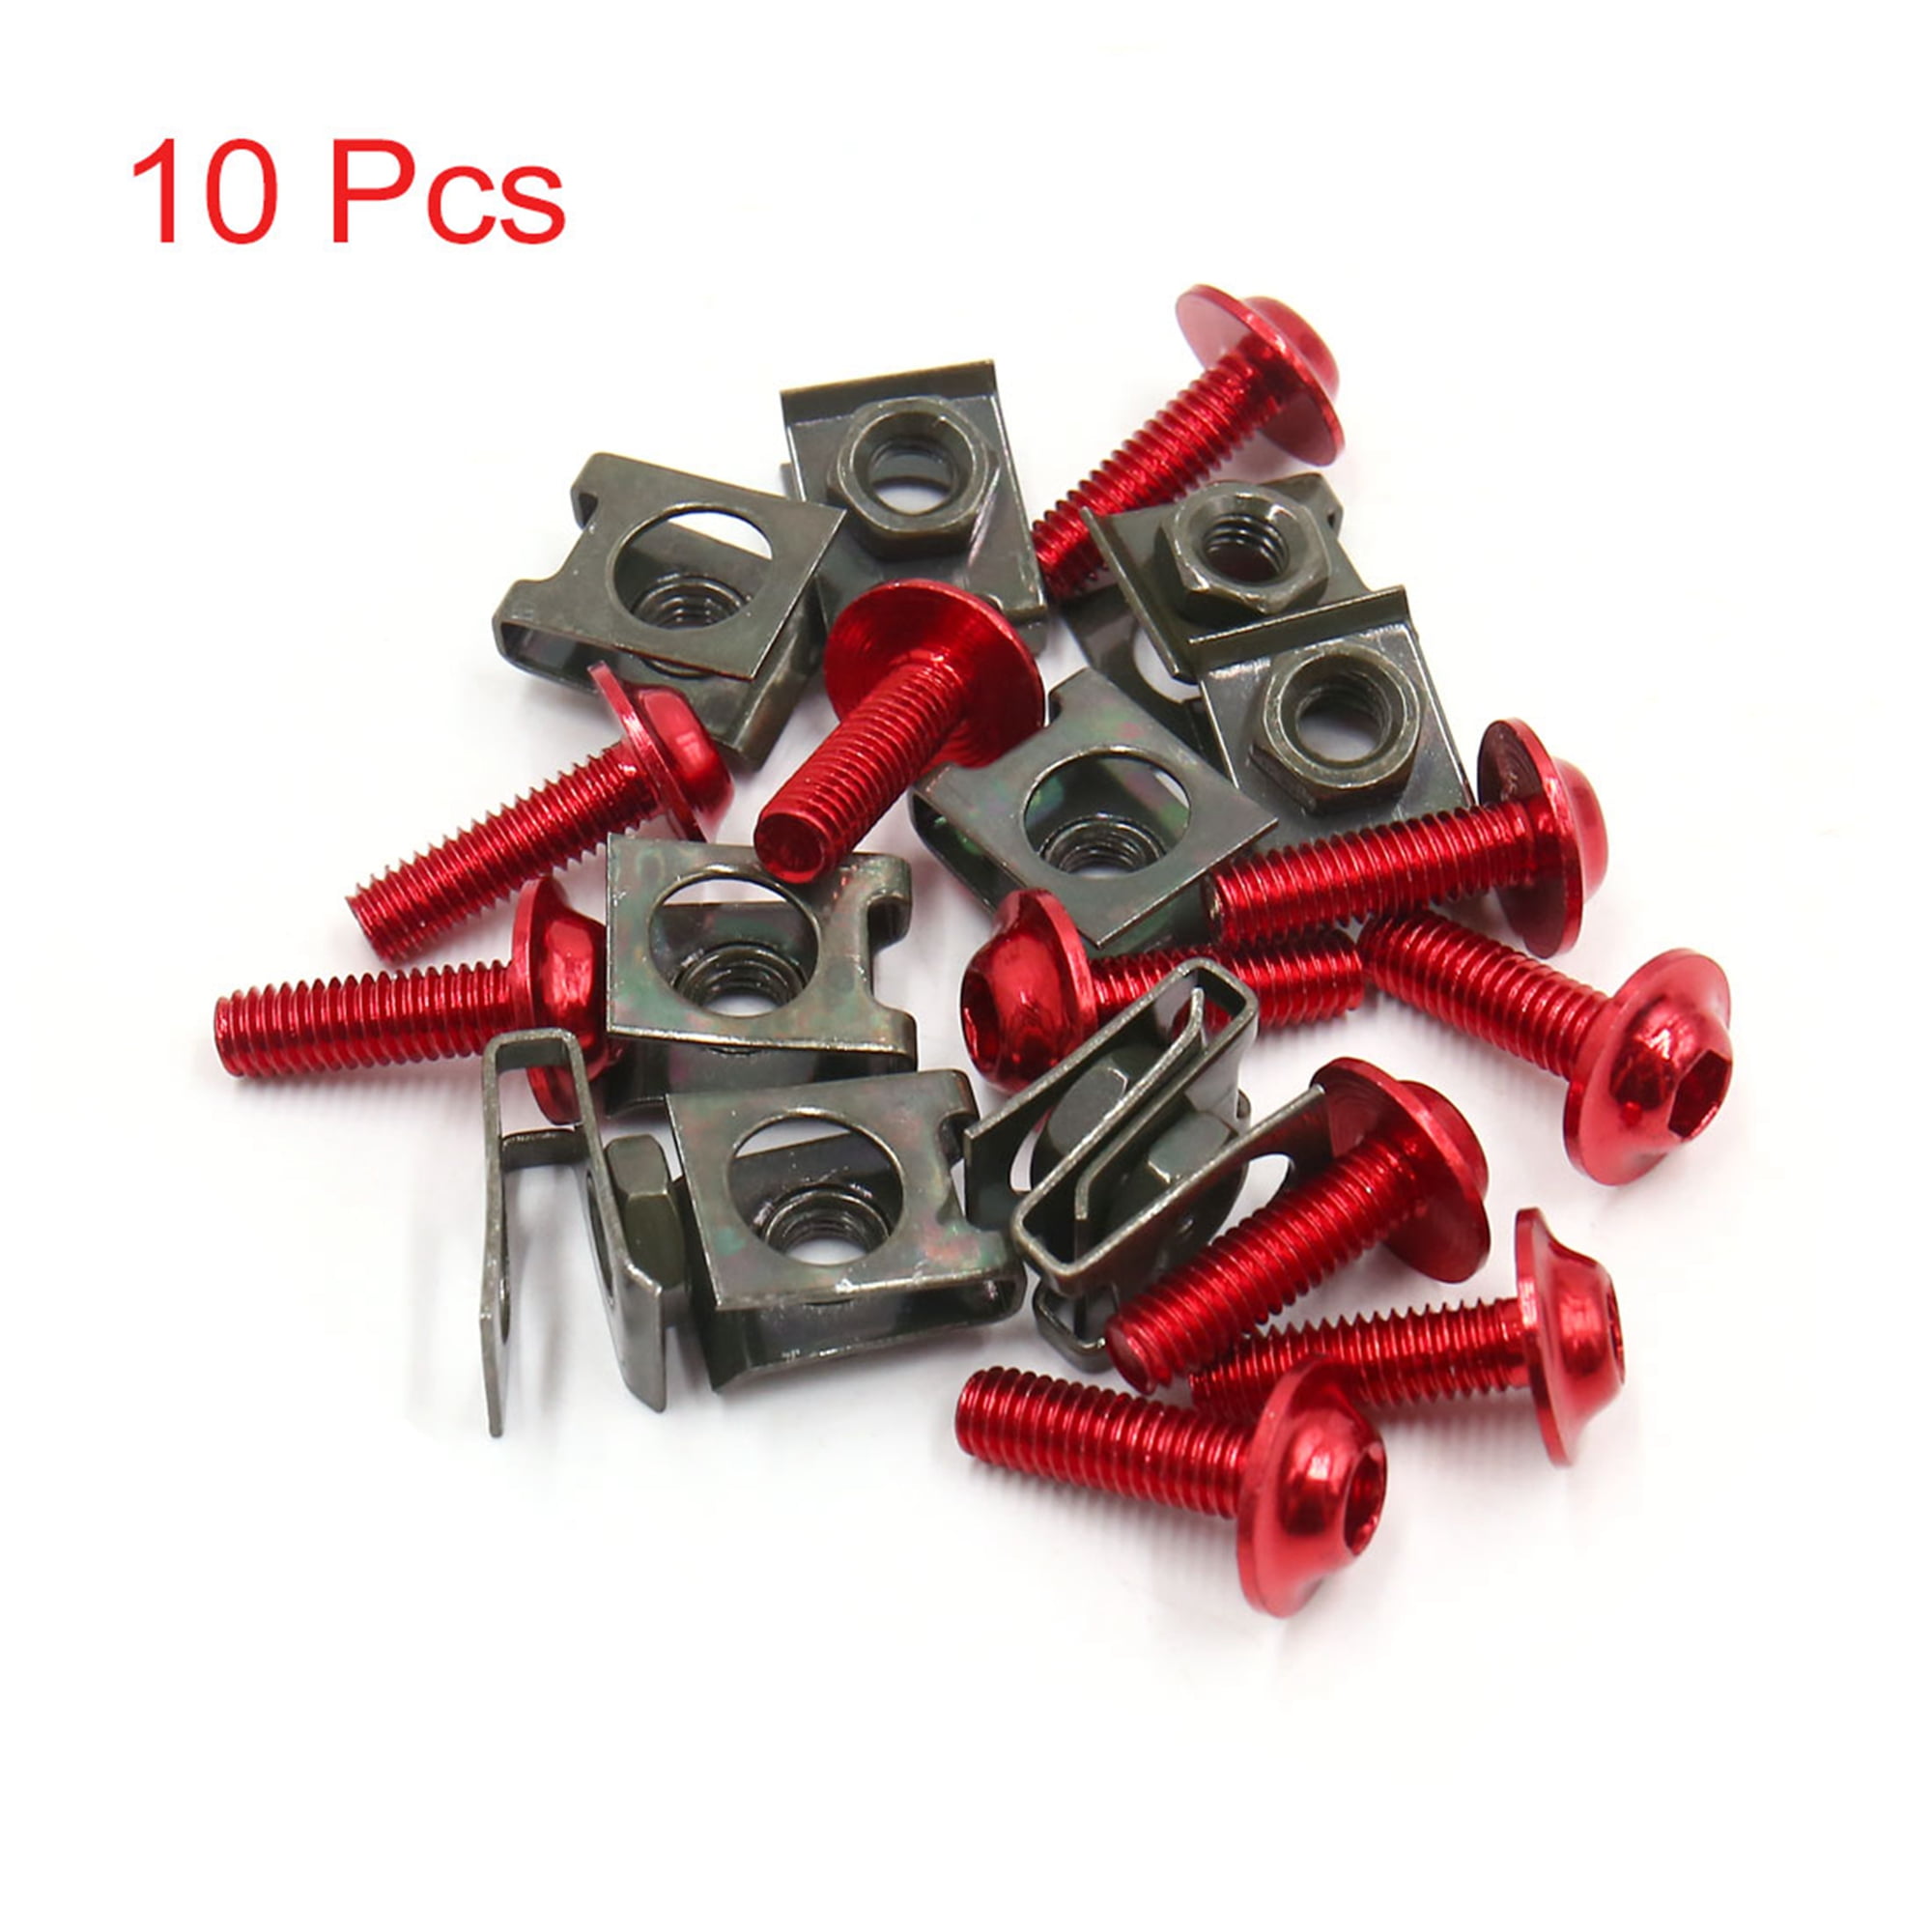 1pcs M6 Motorcycle Fairings Bolts Kits Fastener Clips Screw Spring Nuts Silver